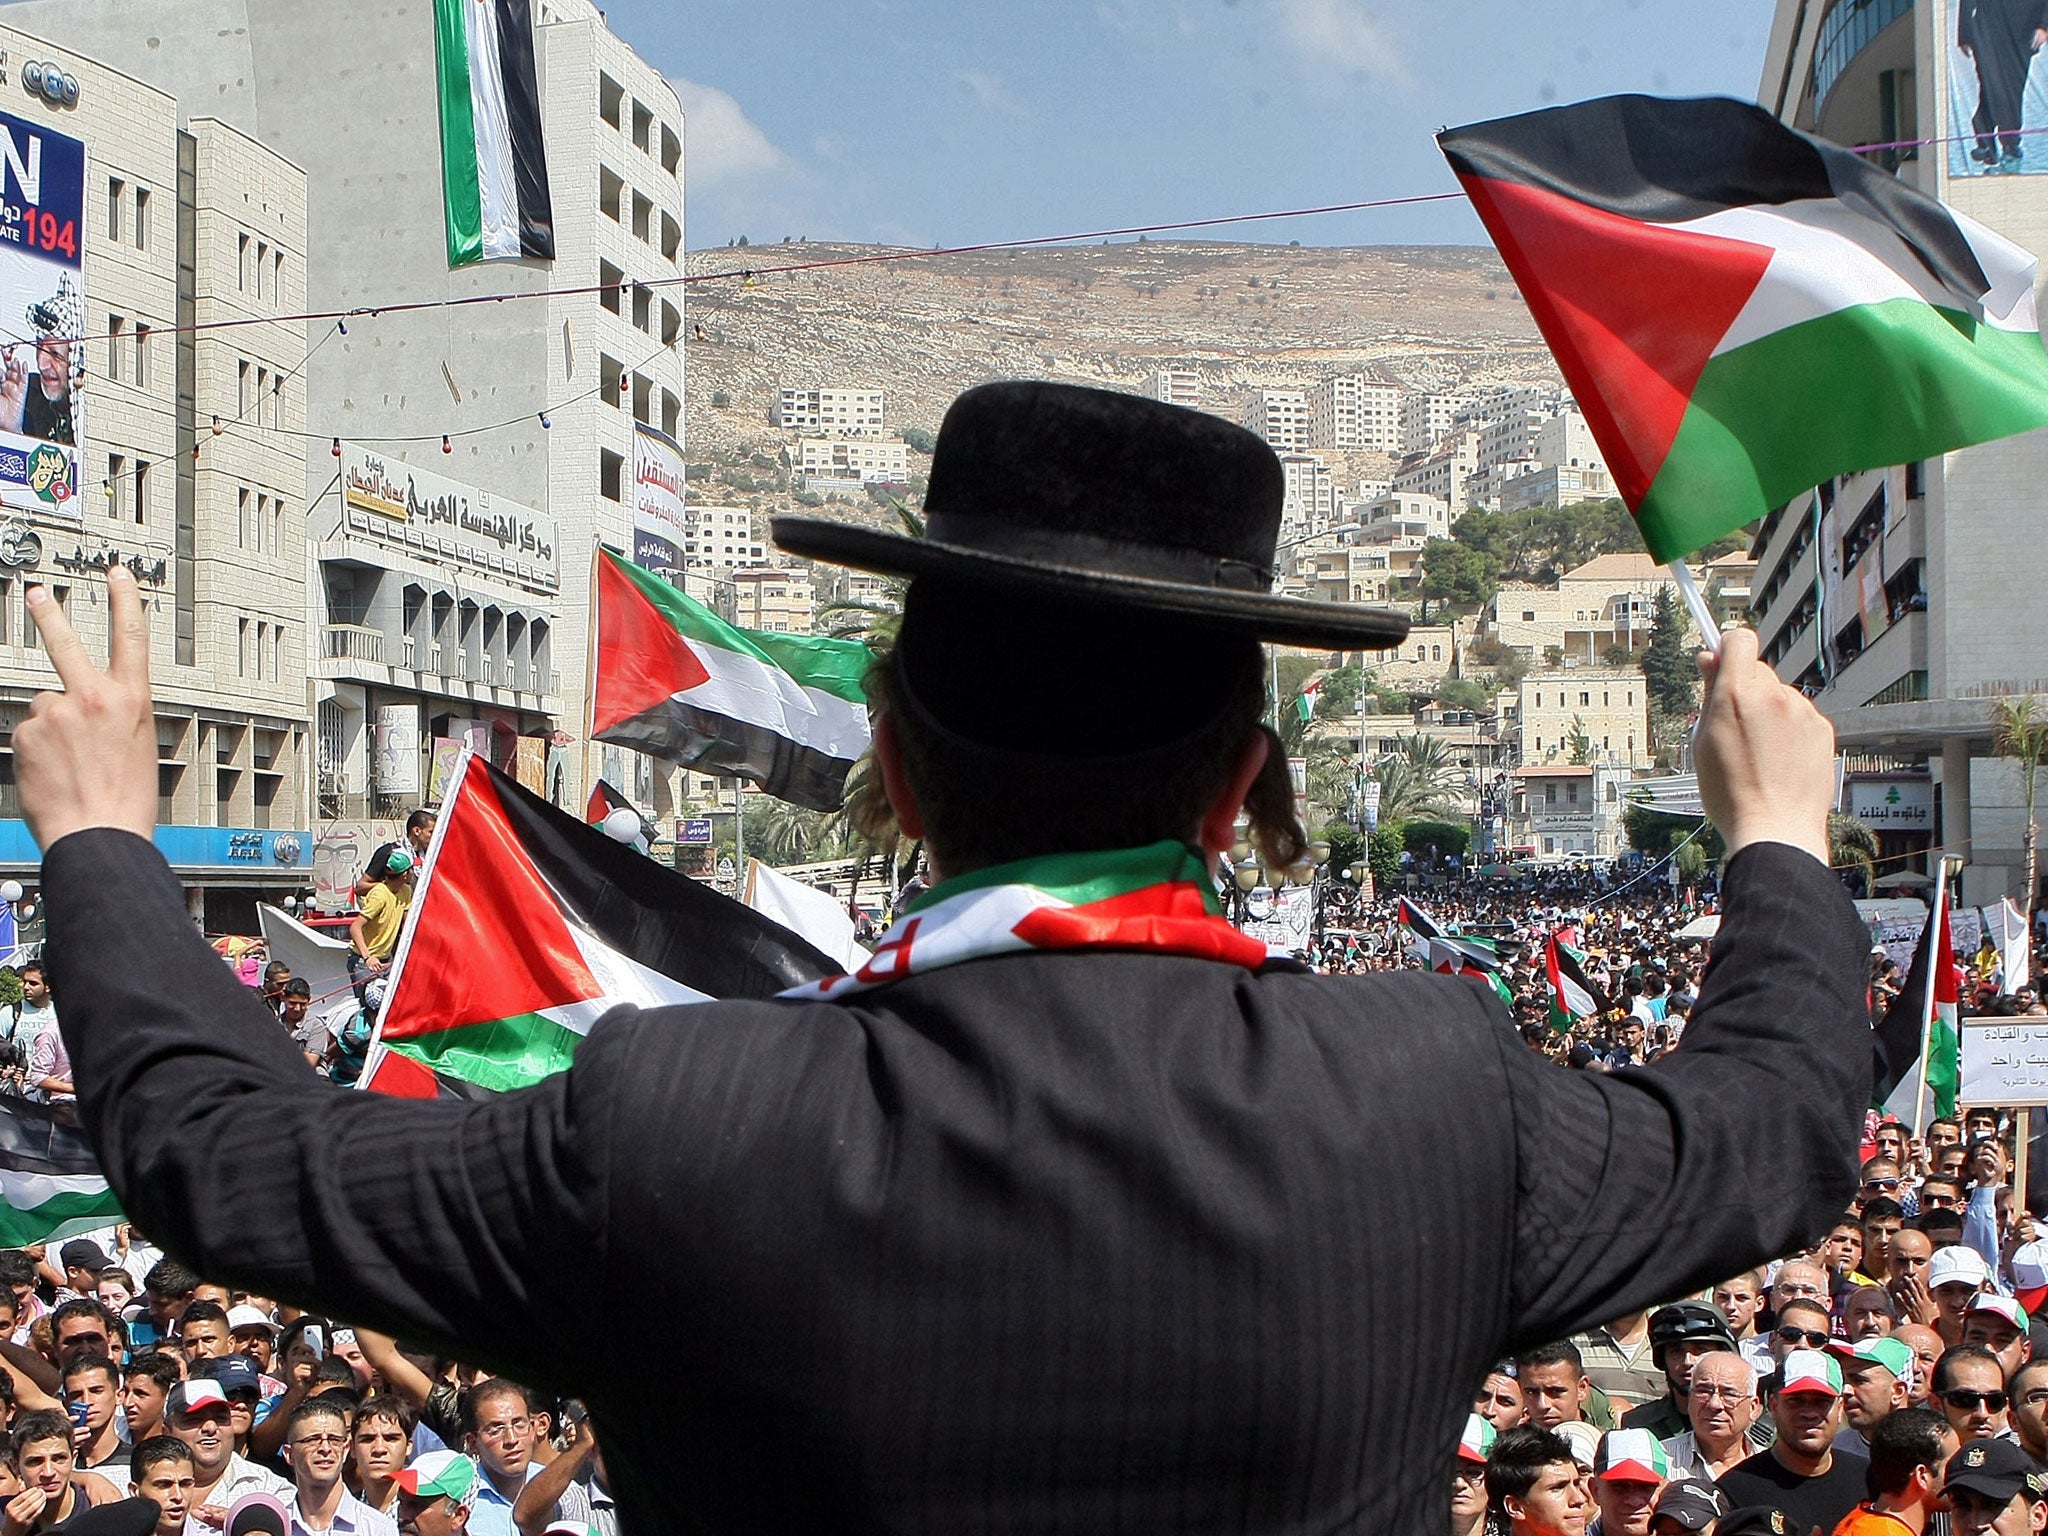 A member of Neturei Karta, a small faction of ultra-Orthodox Jews who oppose Israel's existence, wave a Palestinian flag to express support for the Palestinian bid for statehood recognition at the UN as thousands of Palestinians attend a demonstration on September 21, 2011 in the West Bank city of Nablus.